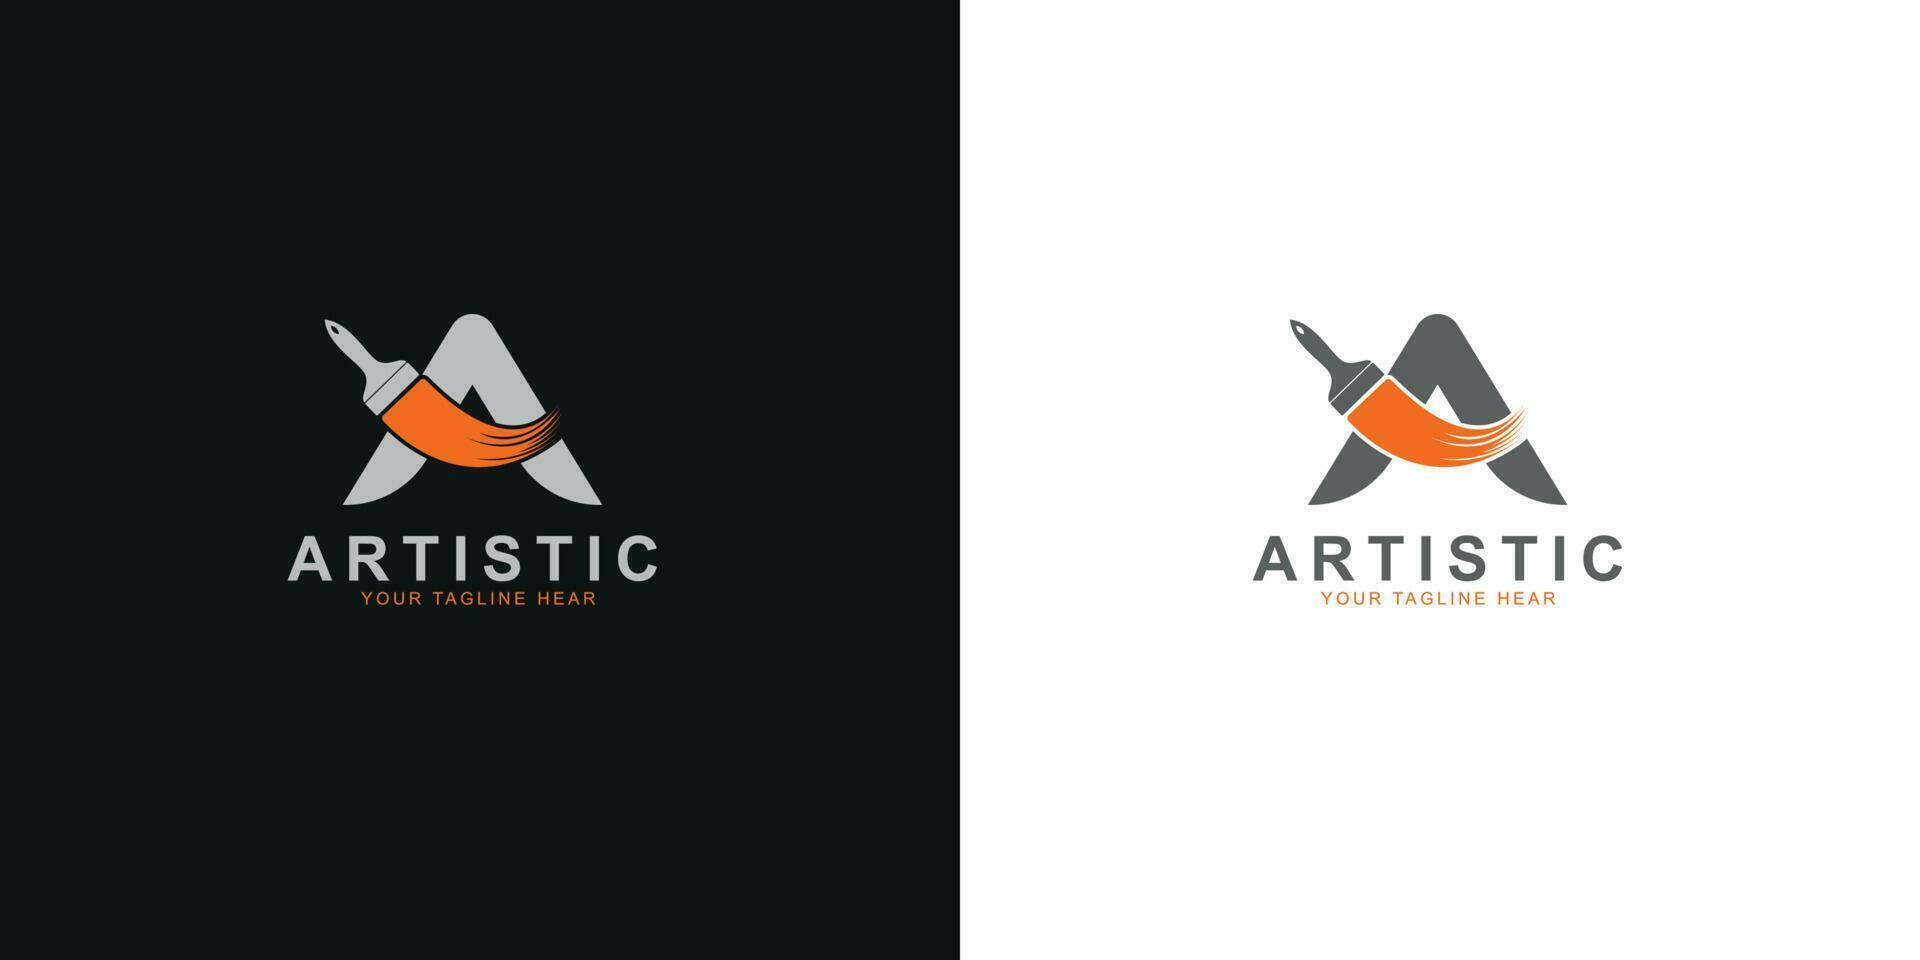 Artistic text logo with Orange and durk paint brush in black colour and flat minimal vector logo Concept.